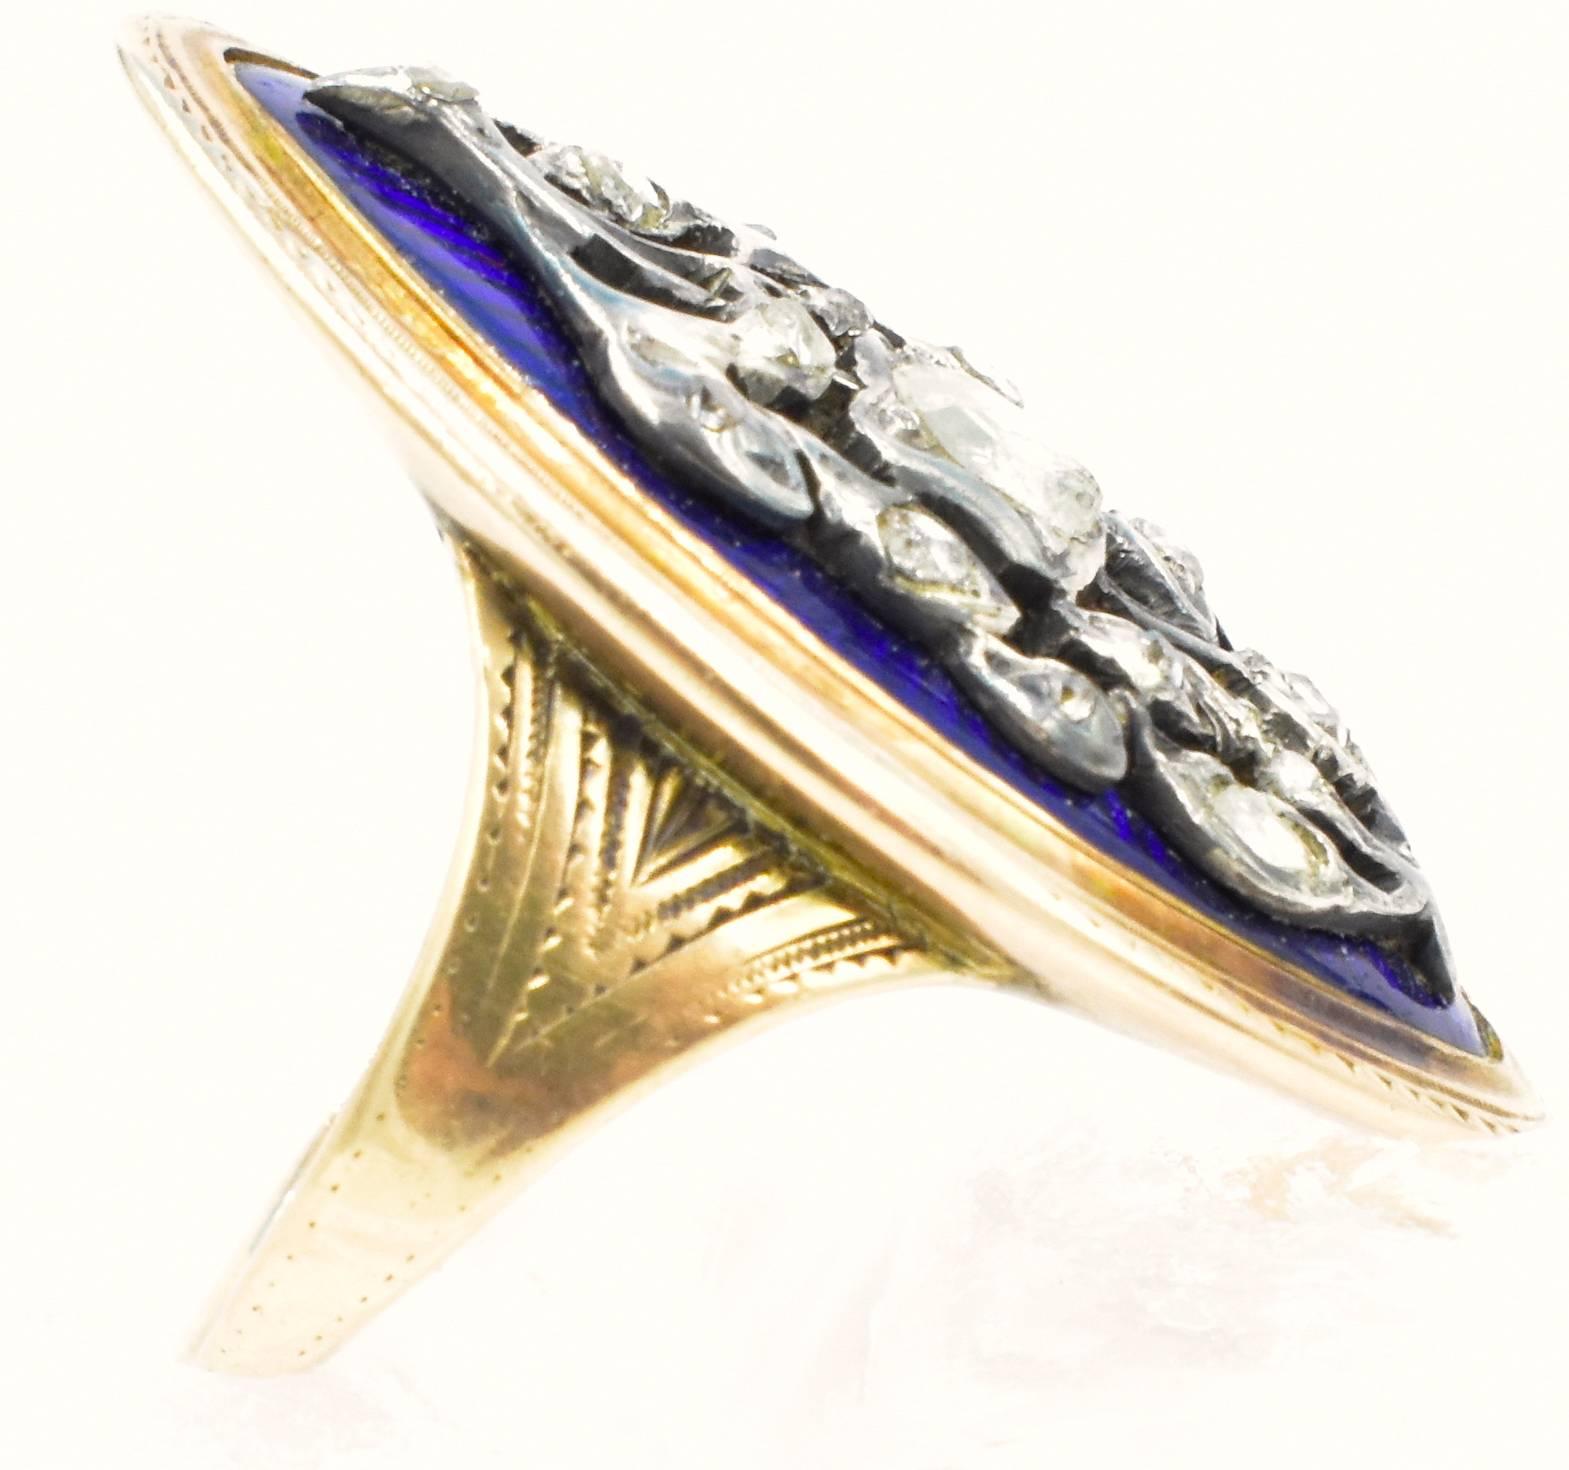 Antique Marquise Shaped Gold, Enamel and Diamond Ring 1